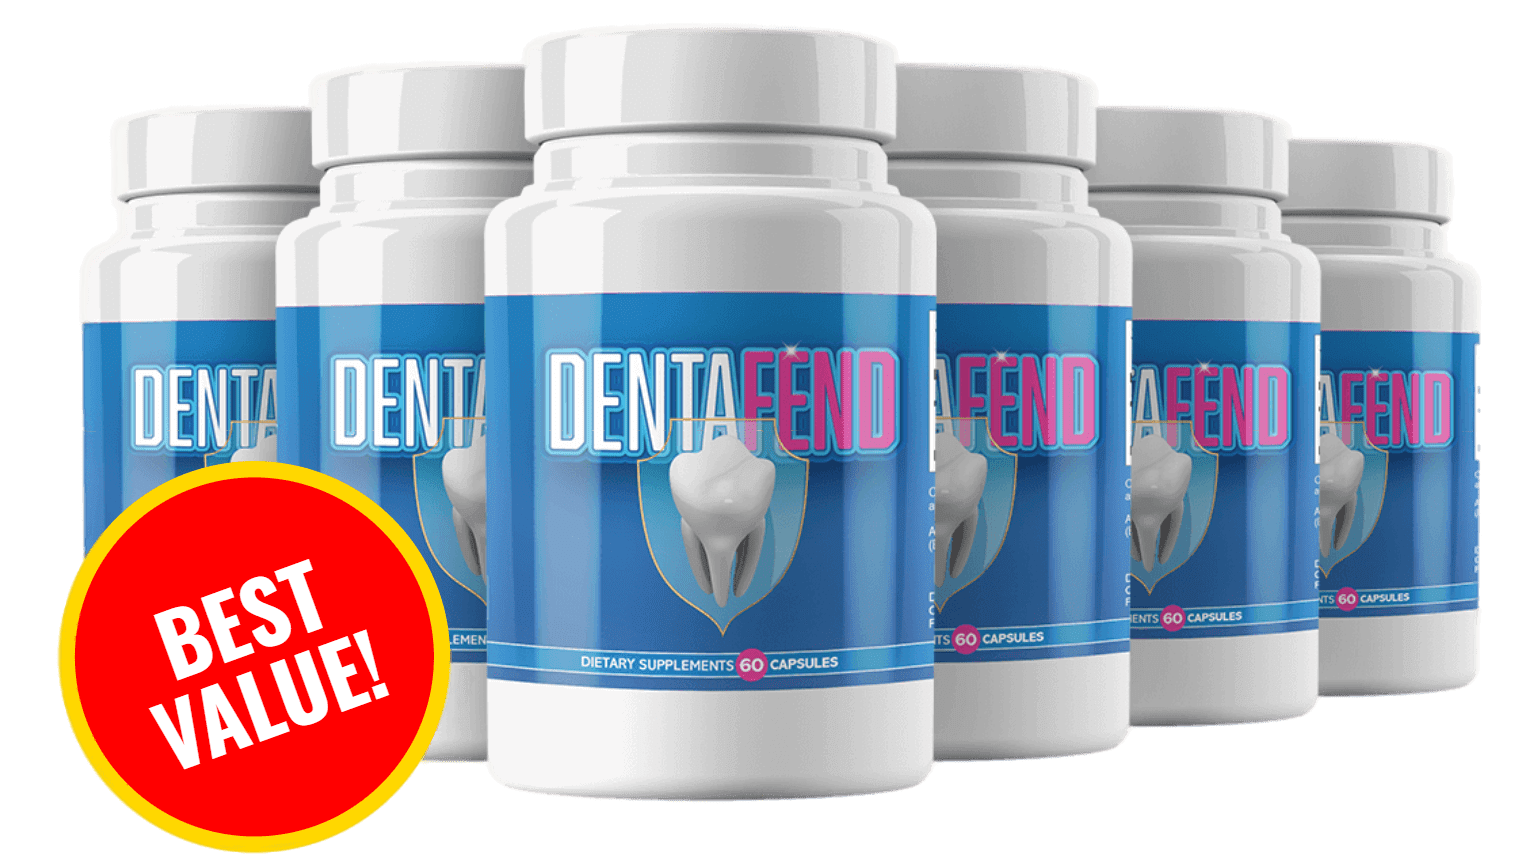 Special offer: Dentafend discounted price